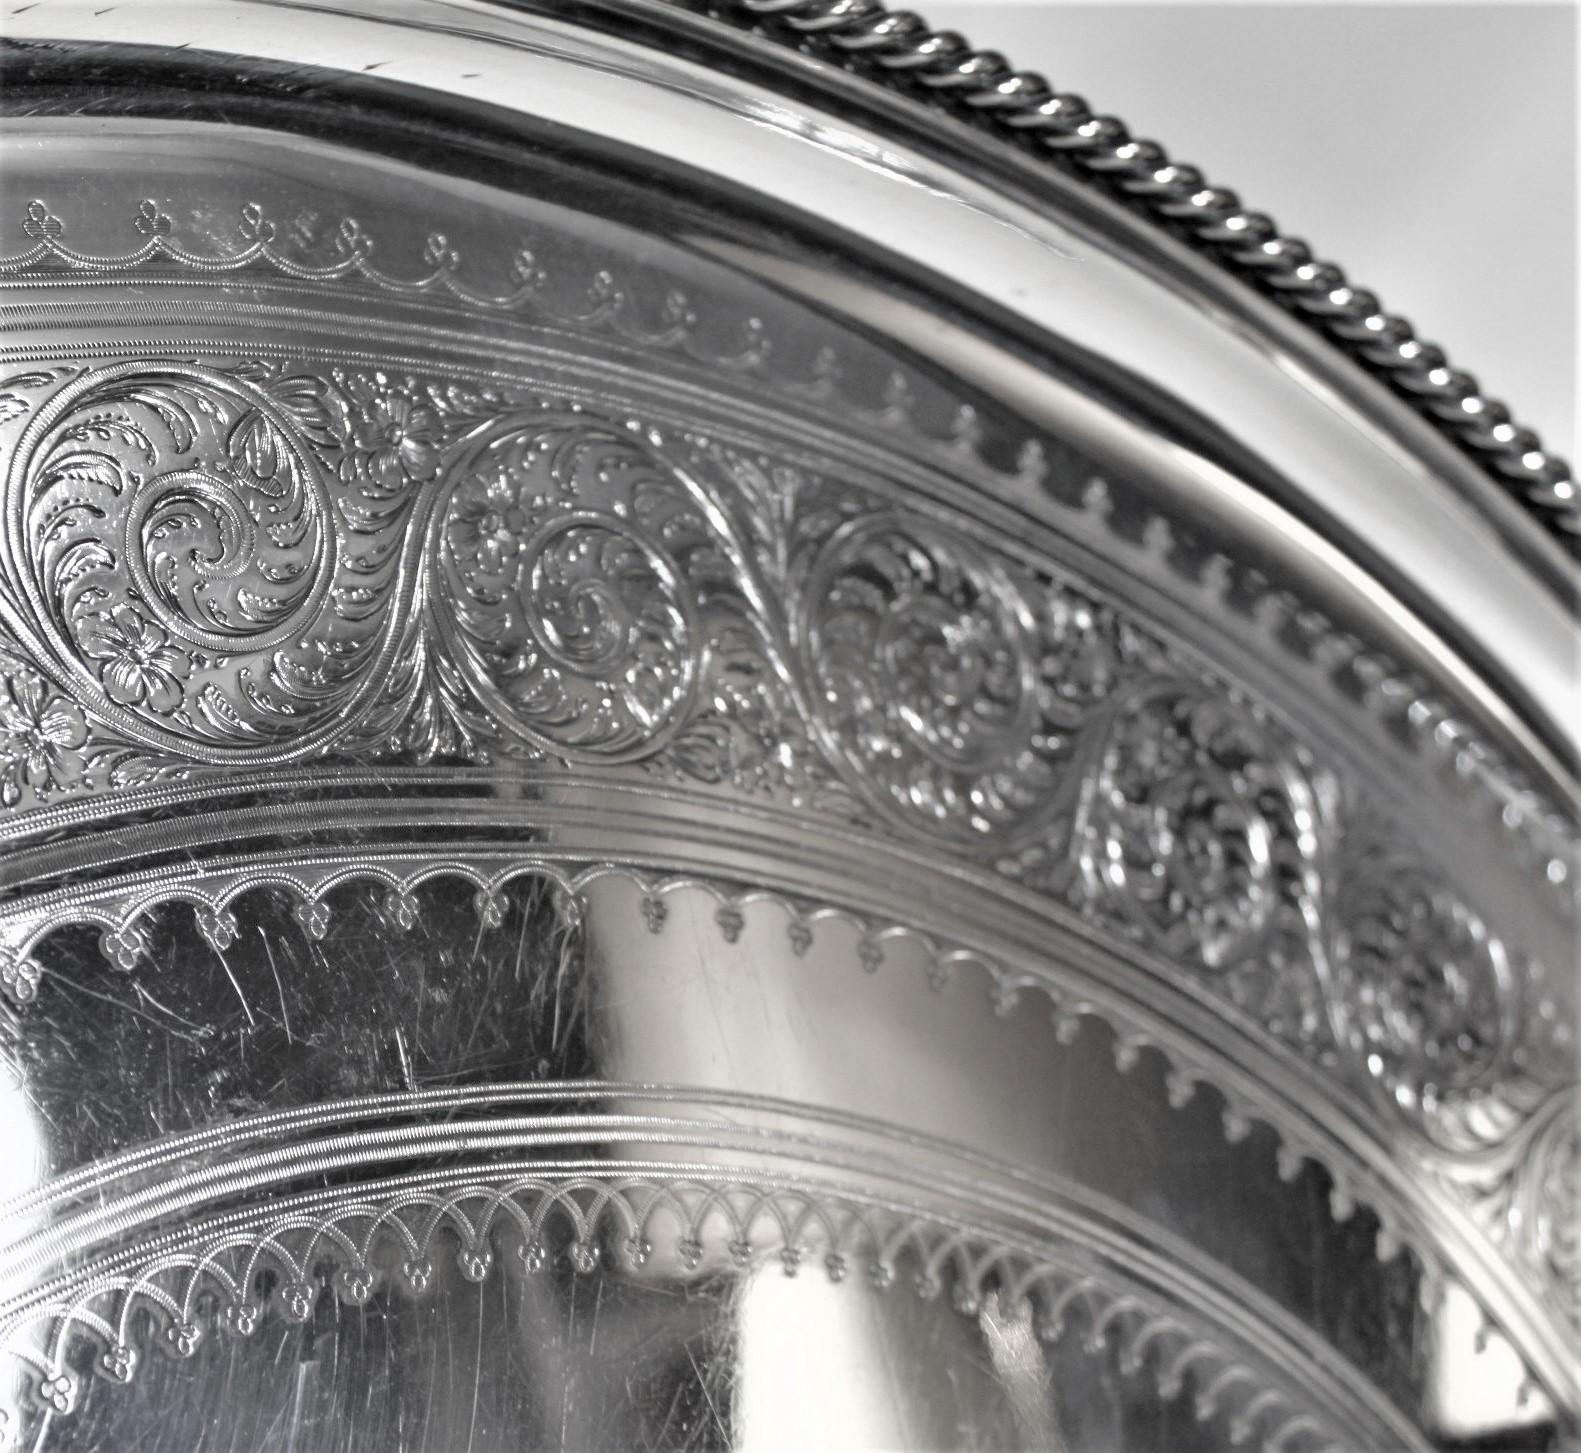 19th Century Antique English Silver Plated Serving Tray with Ornate Engraving and Handles For Sale